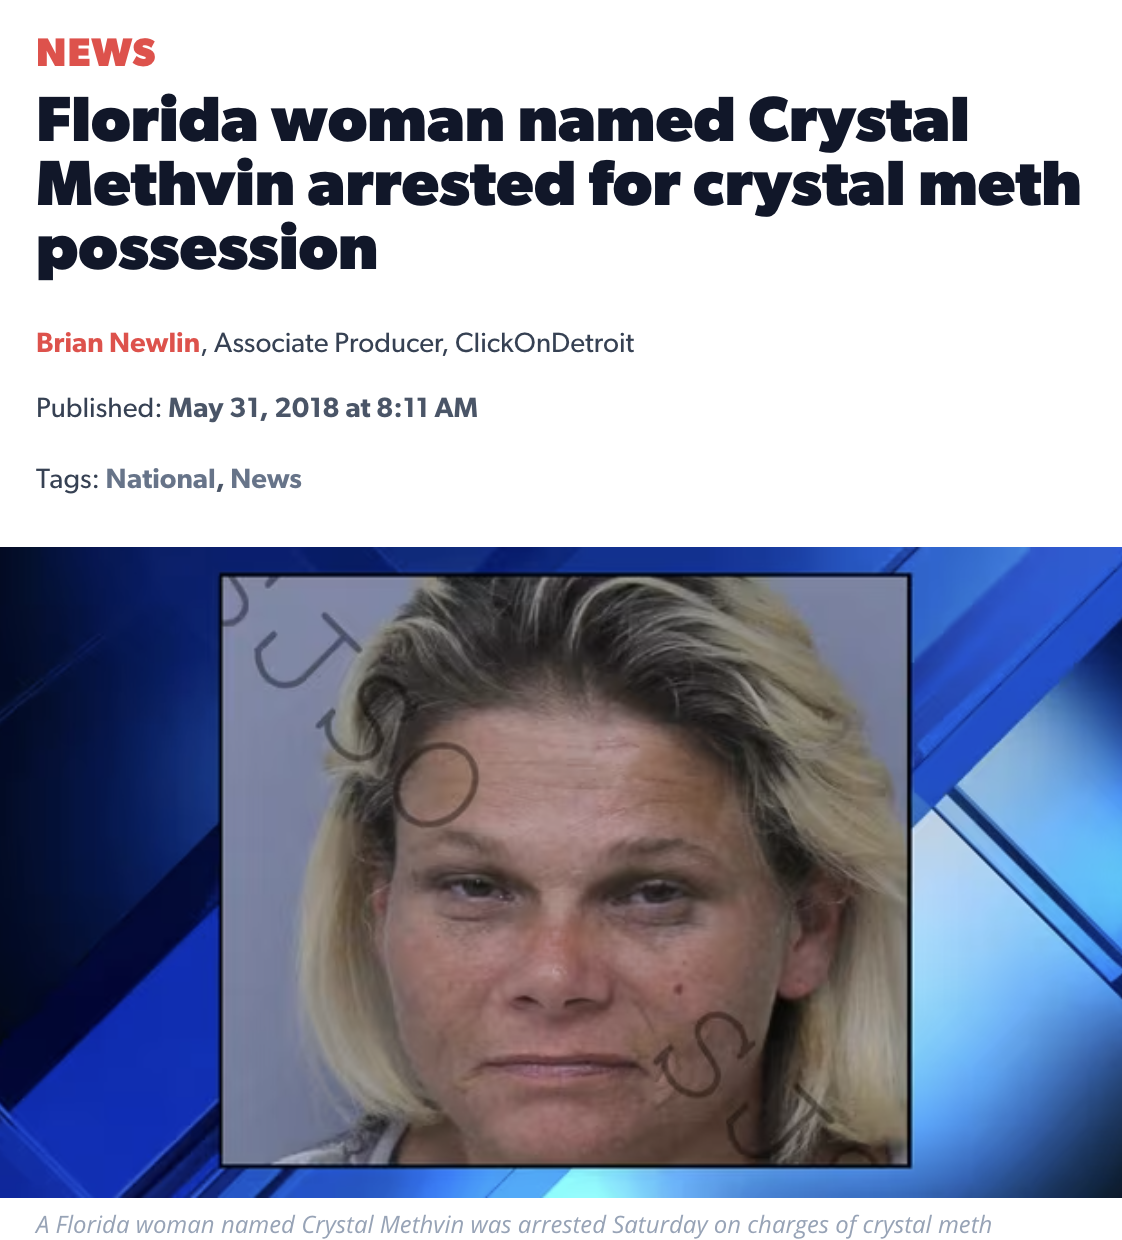 blond - News Florida woman named Crystal Methvin arrested for crystal meth possession Brian Newlin, Associate Producer, ClickOnDetroit Published at Tags National, News J A Florida woman named Crystal Methvin was arrested Saturday on charges of crystal met